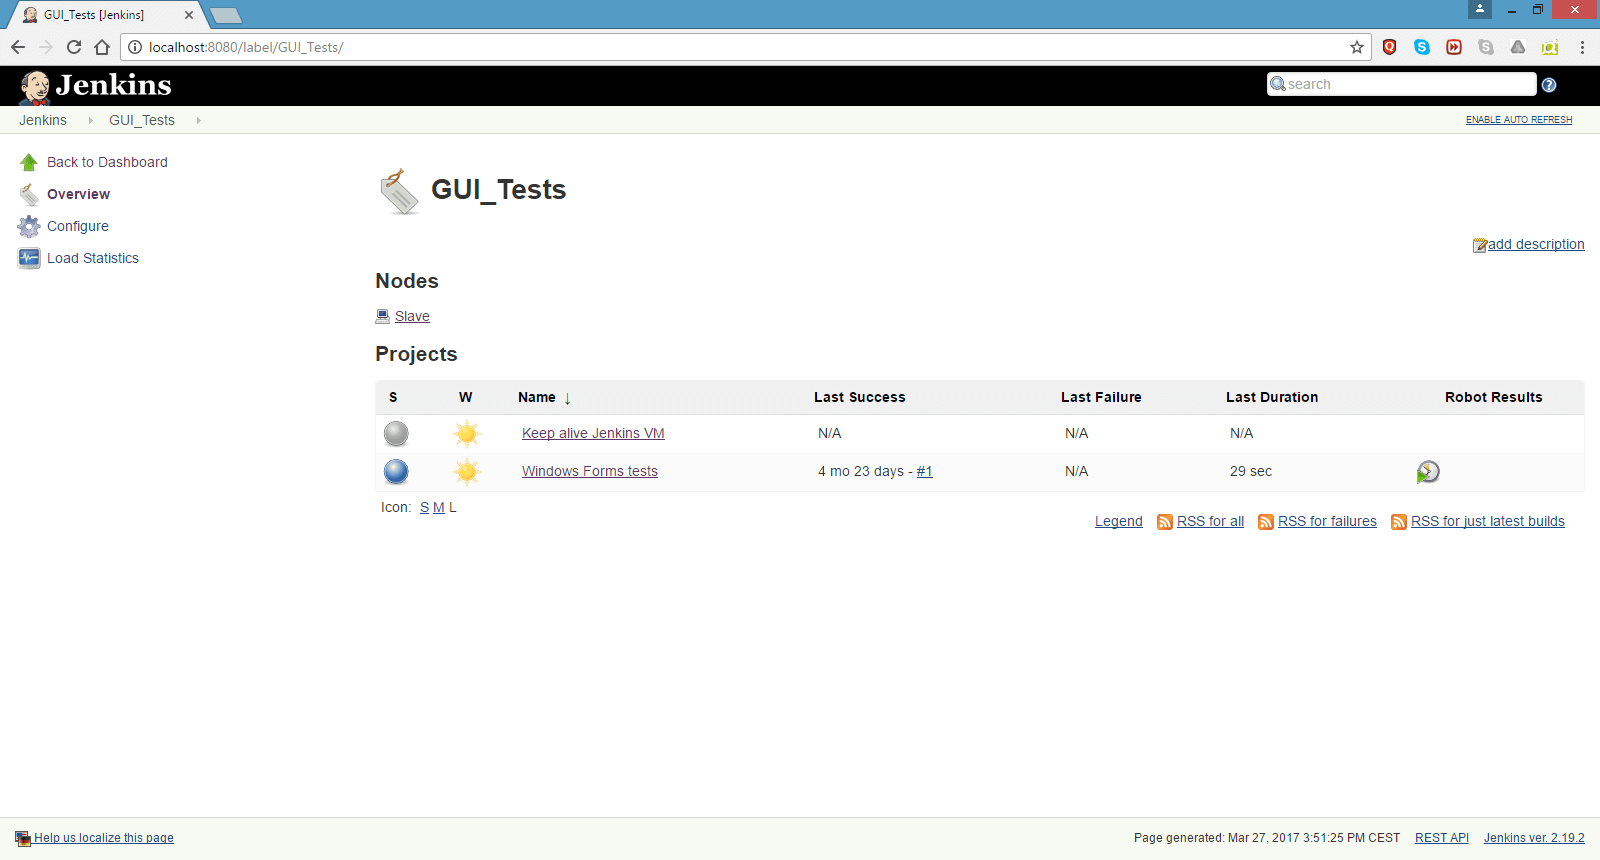 Jobs configuration on the Jenkins Slave, labeled as “GUI_Tests” that will execute “keep alive” job and main job for running Windows Forms test